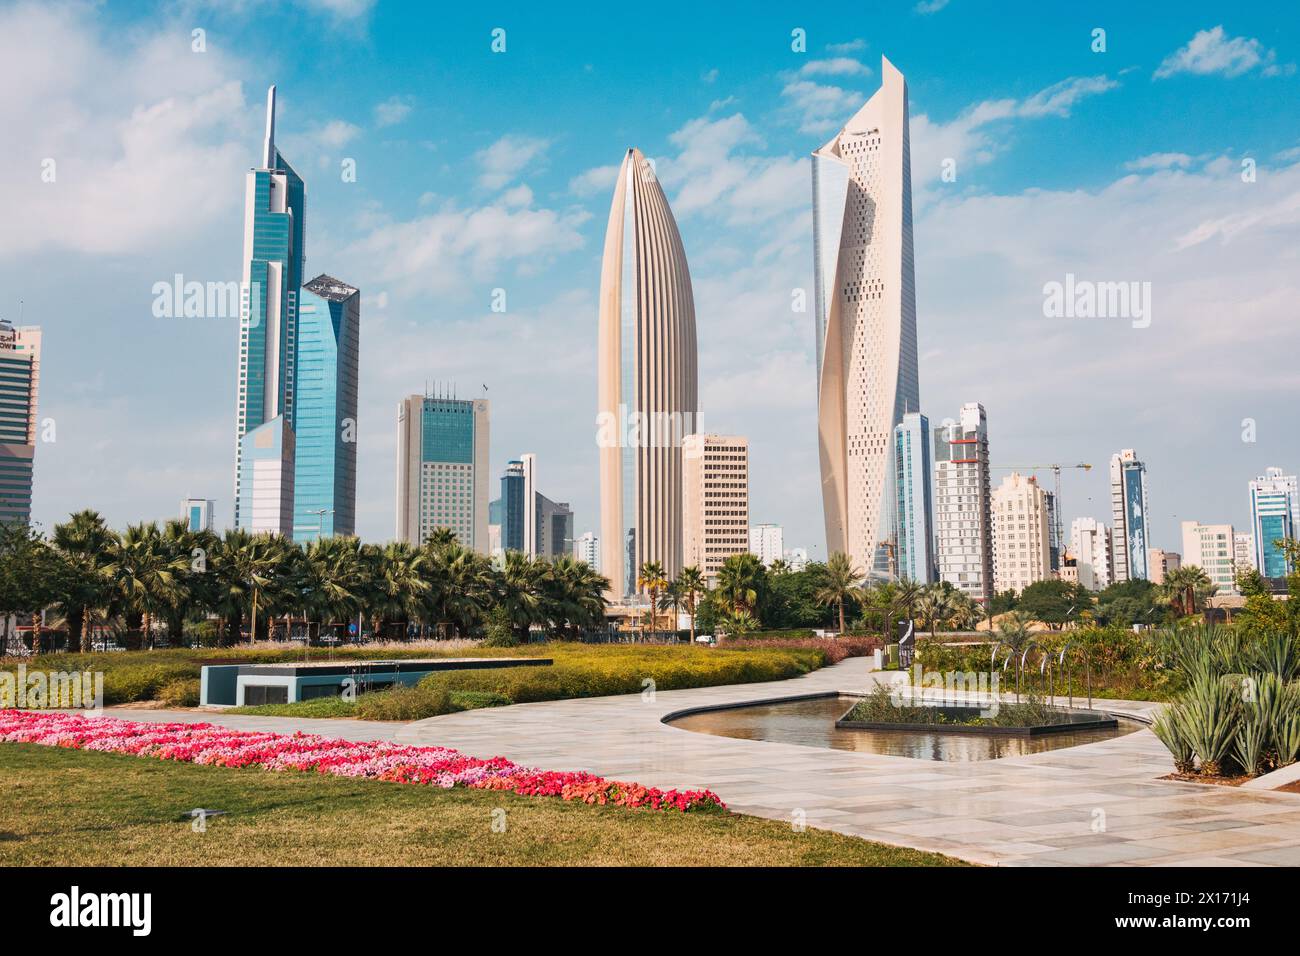 Skyscrapers in the business district of Kuwait City, notably Al Hamra Tower (tallest) and NBK Tower (oval) as seen from Al Shaheed Park Stock Photo